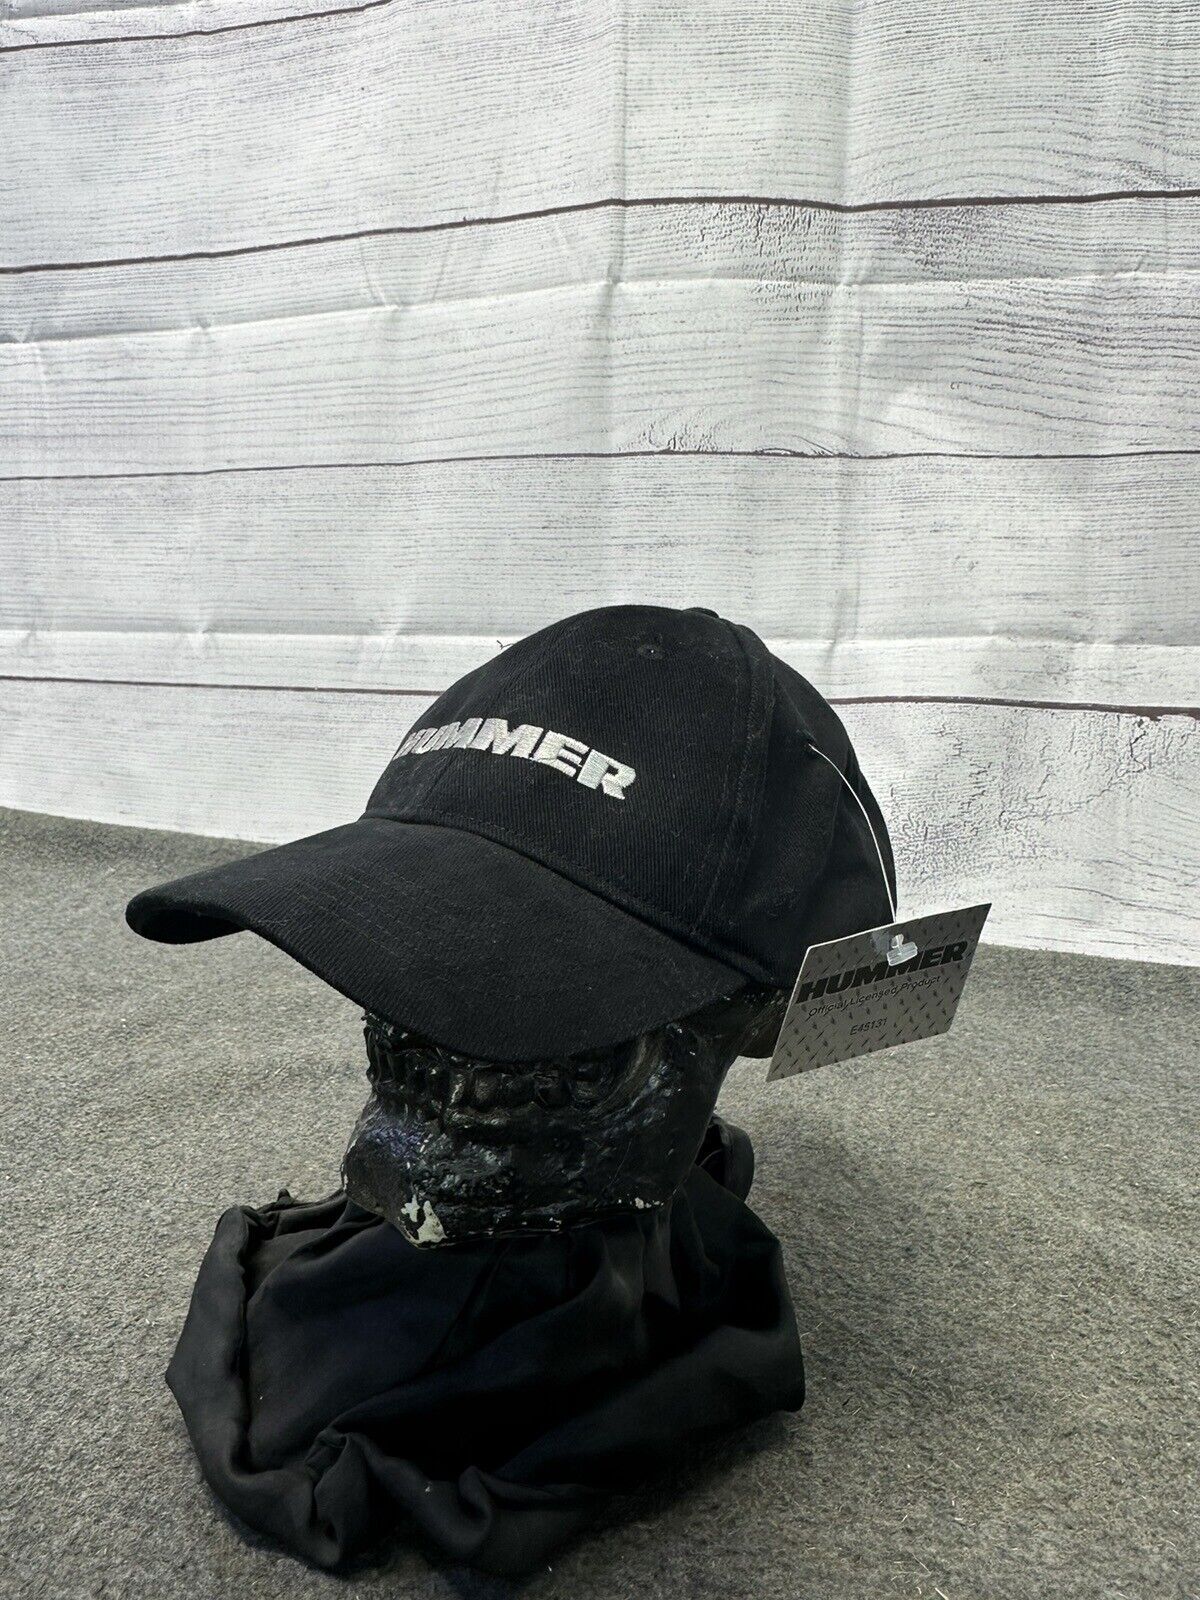 Vintage 2002 AUTHENTIC Hummer H2 Cap Hat Black New With Tags Like Nothing Else